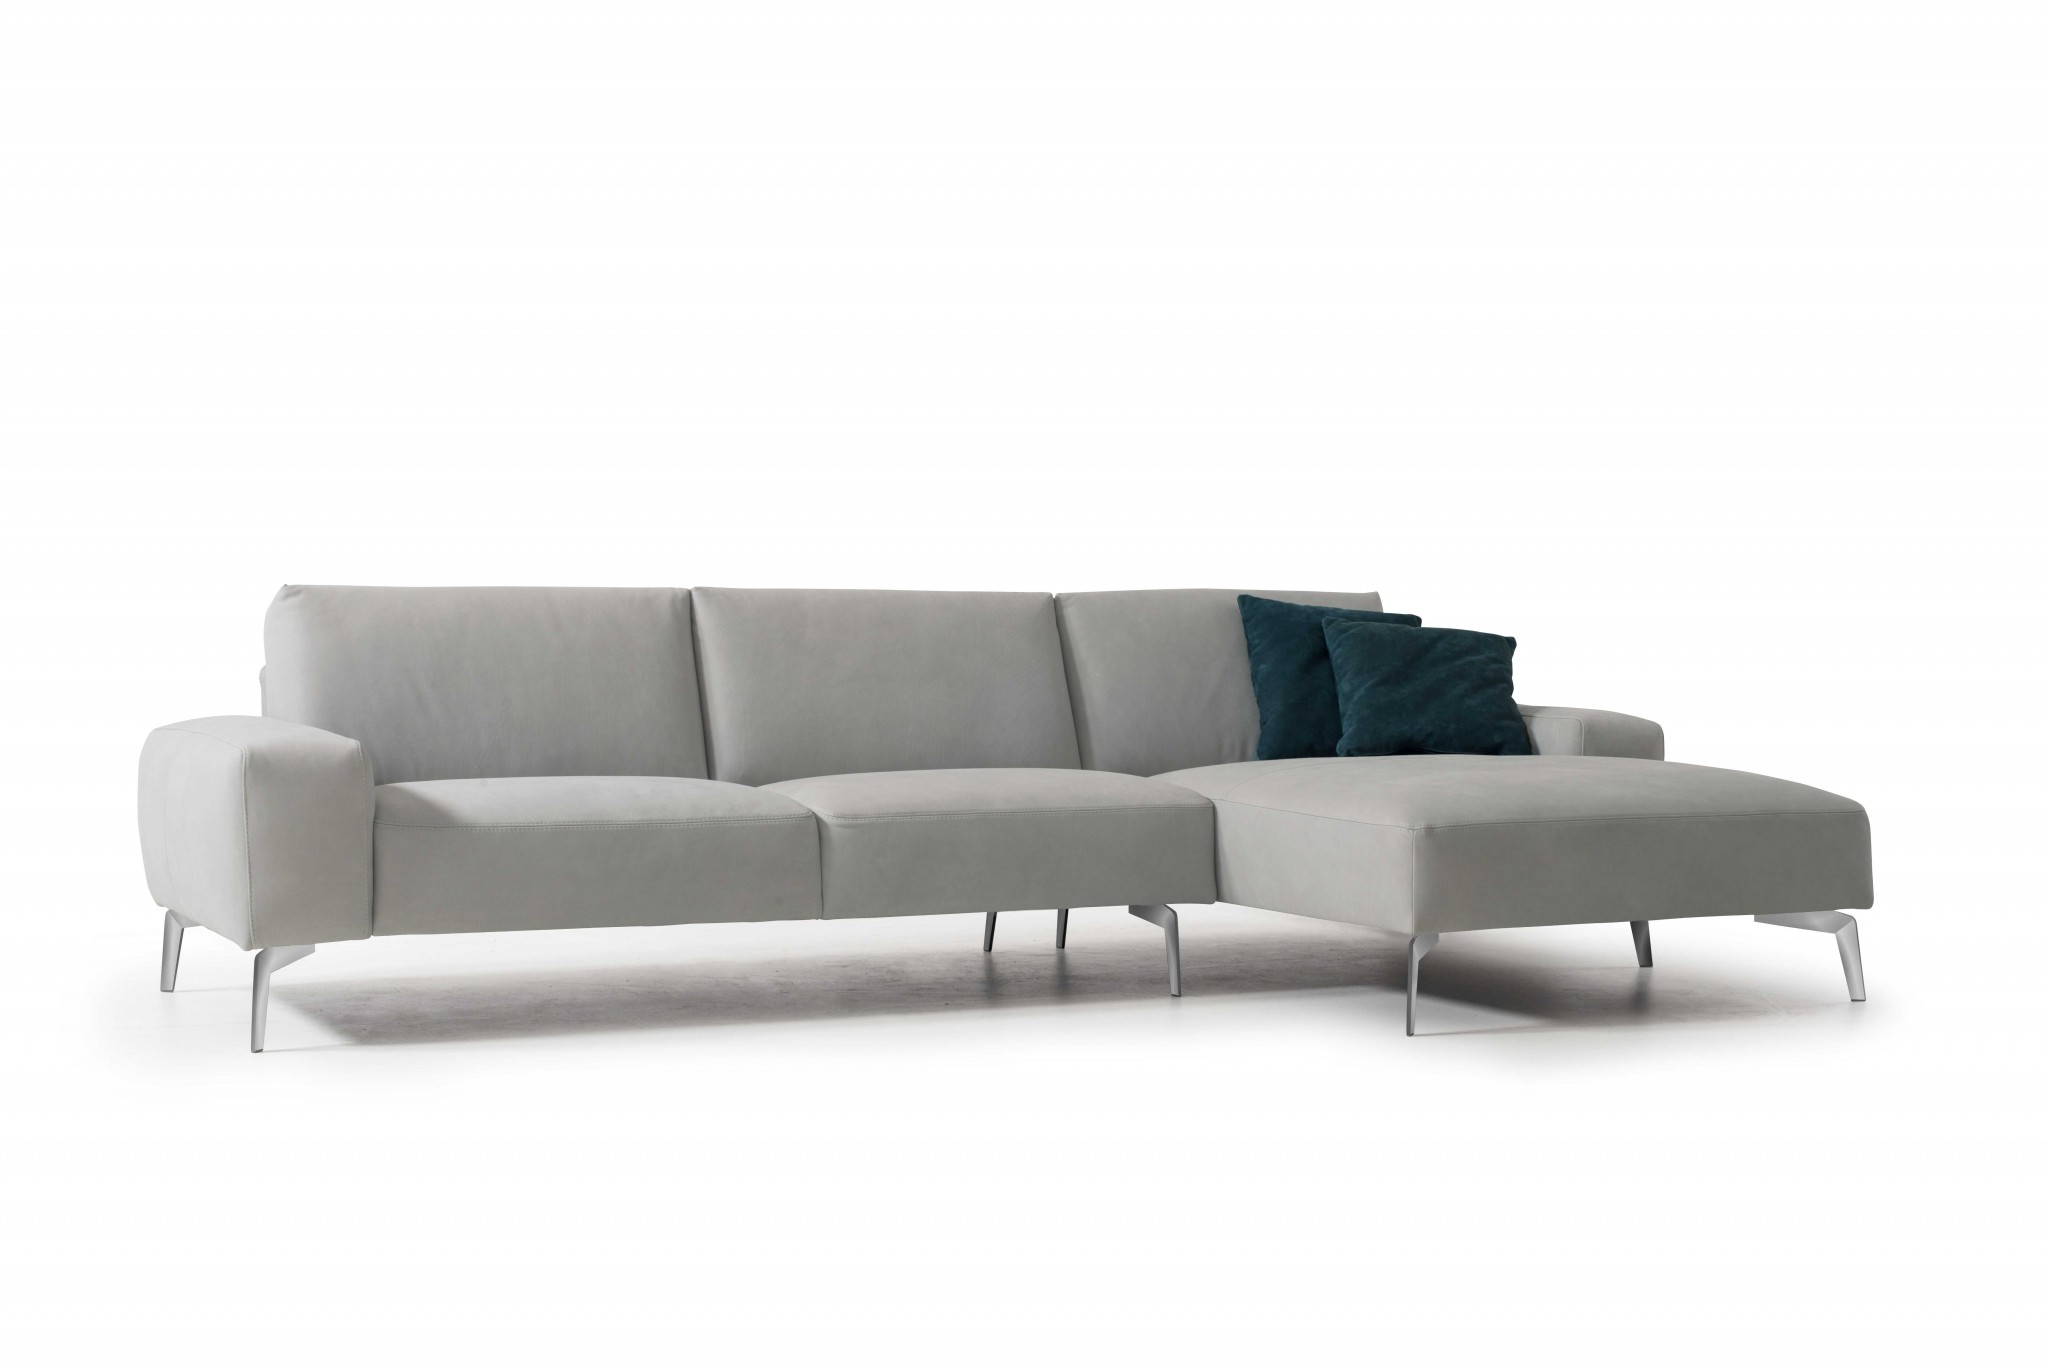 122" X 39" X 33" Light Gray Leather Sectional & Chaise